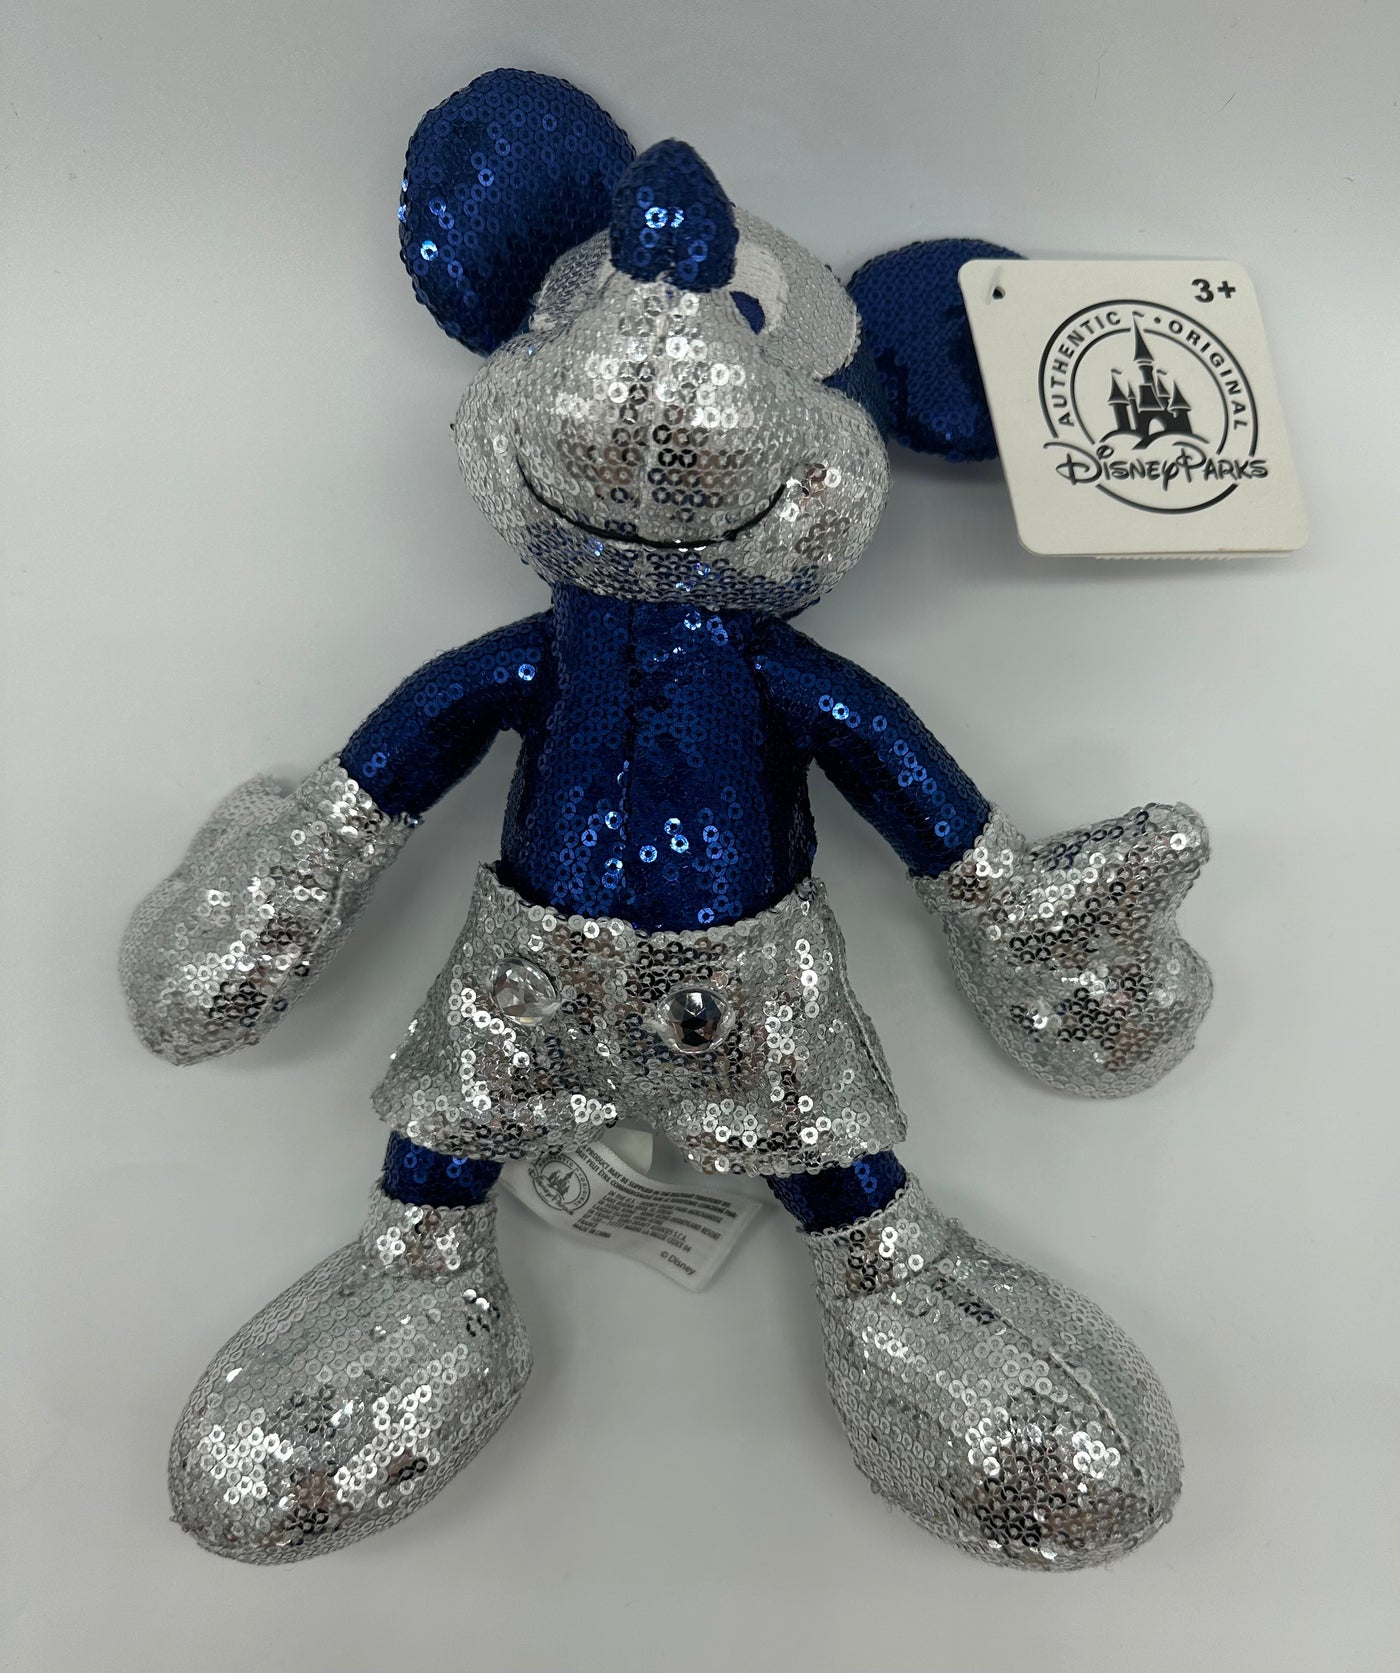 Disney Parks 60th Anniversary Sequin Mickey Plush New with Tag